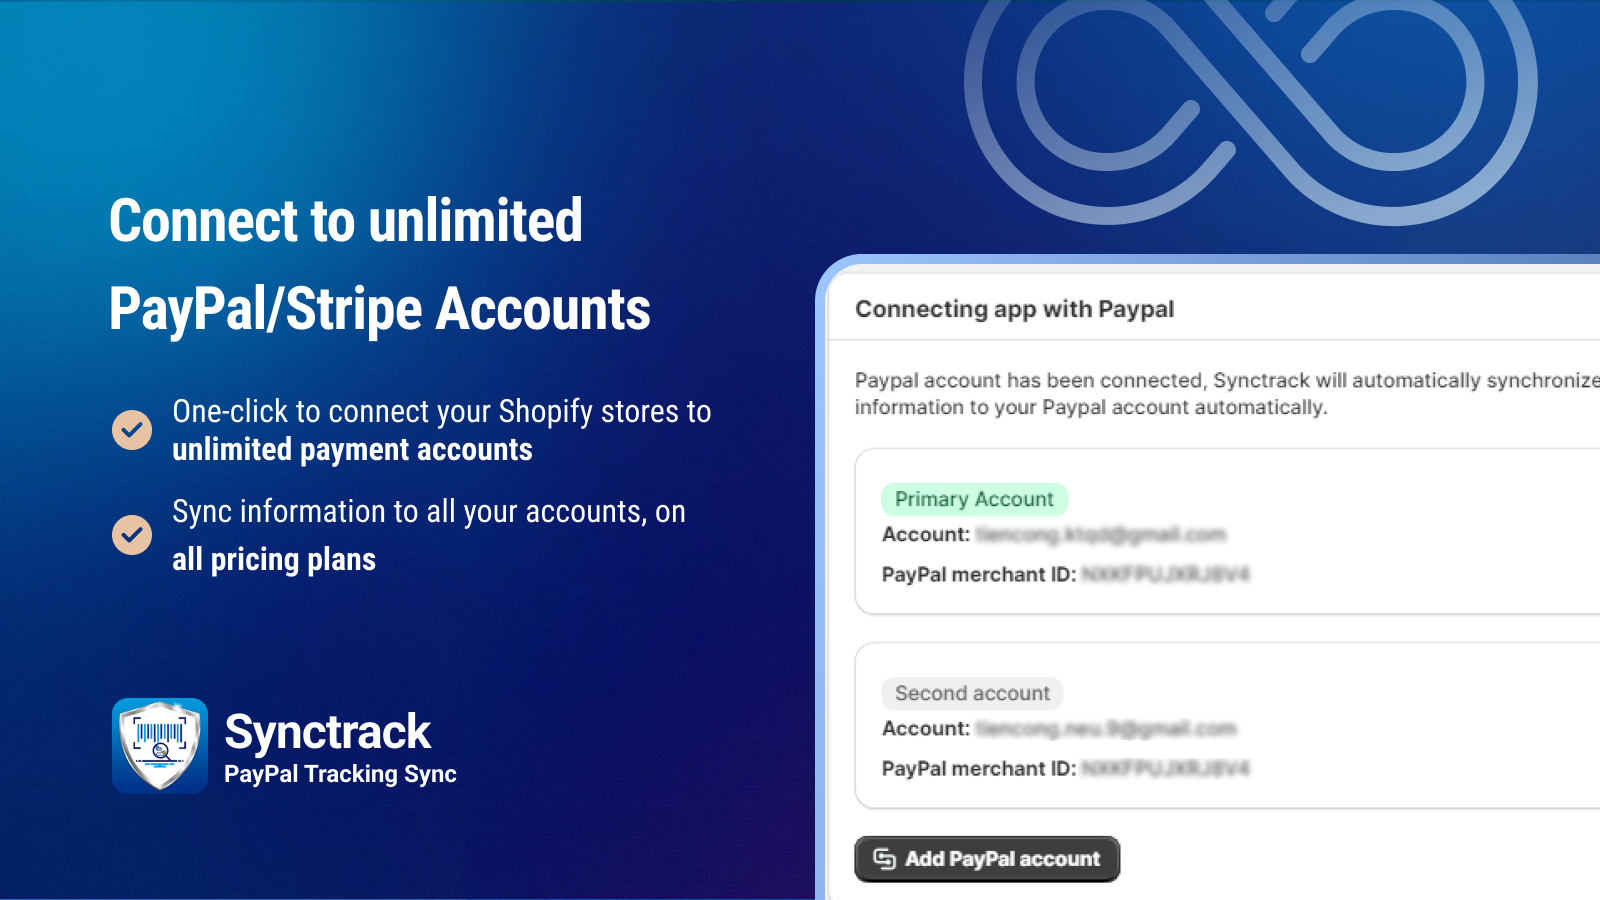 Synctrack assists all checkout gateways and other third parties